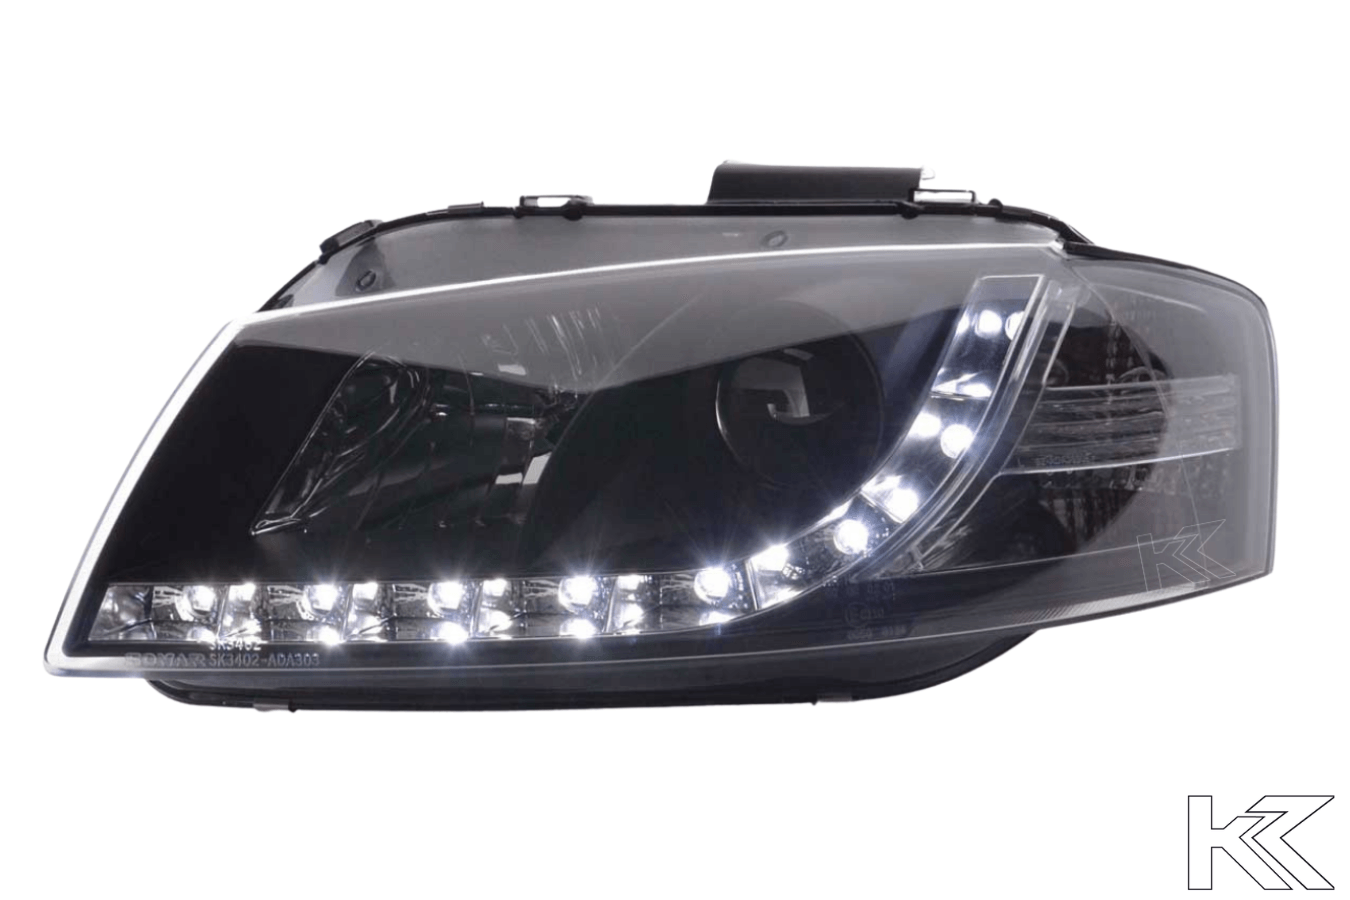 Audi A3 (8P 8PA) Black LED Headlights with Daytime Running Lights (2003-2007) - K2 Industries